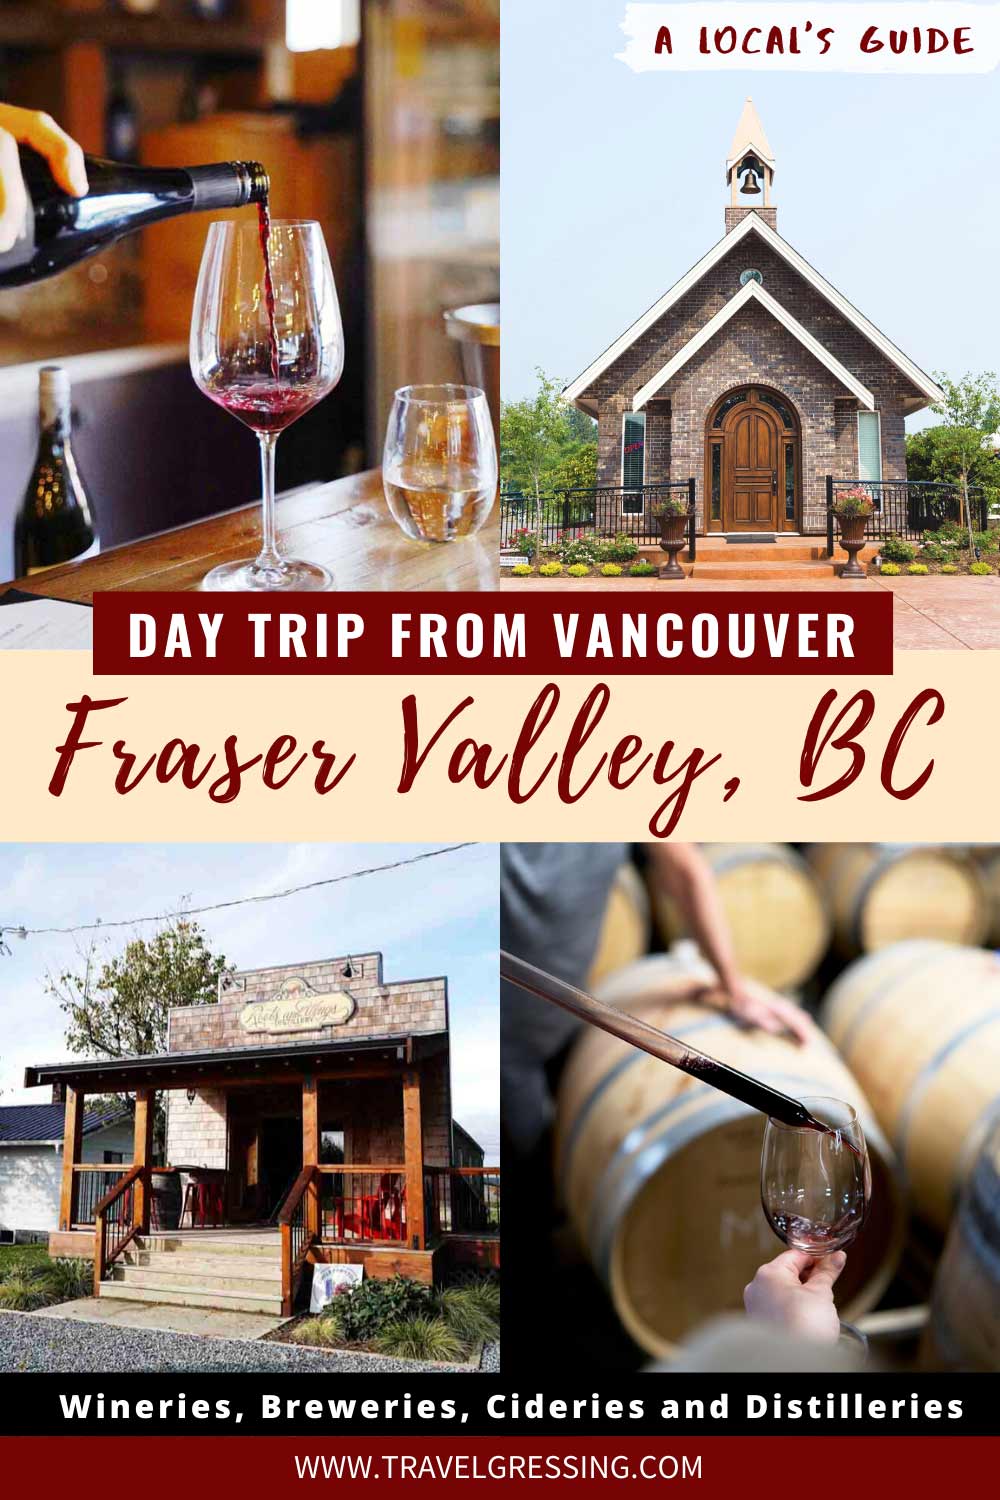 Wineries, Breweries, Cideries and Distilleries in Canada's Fraser Valley BC